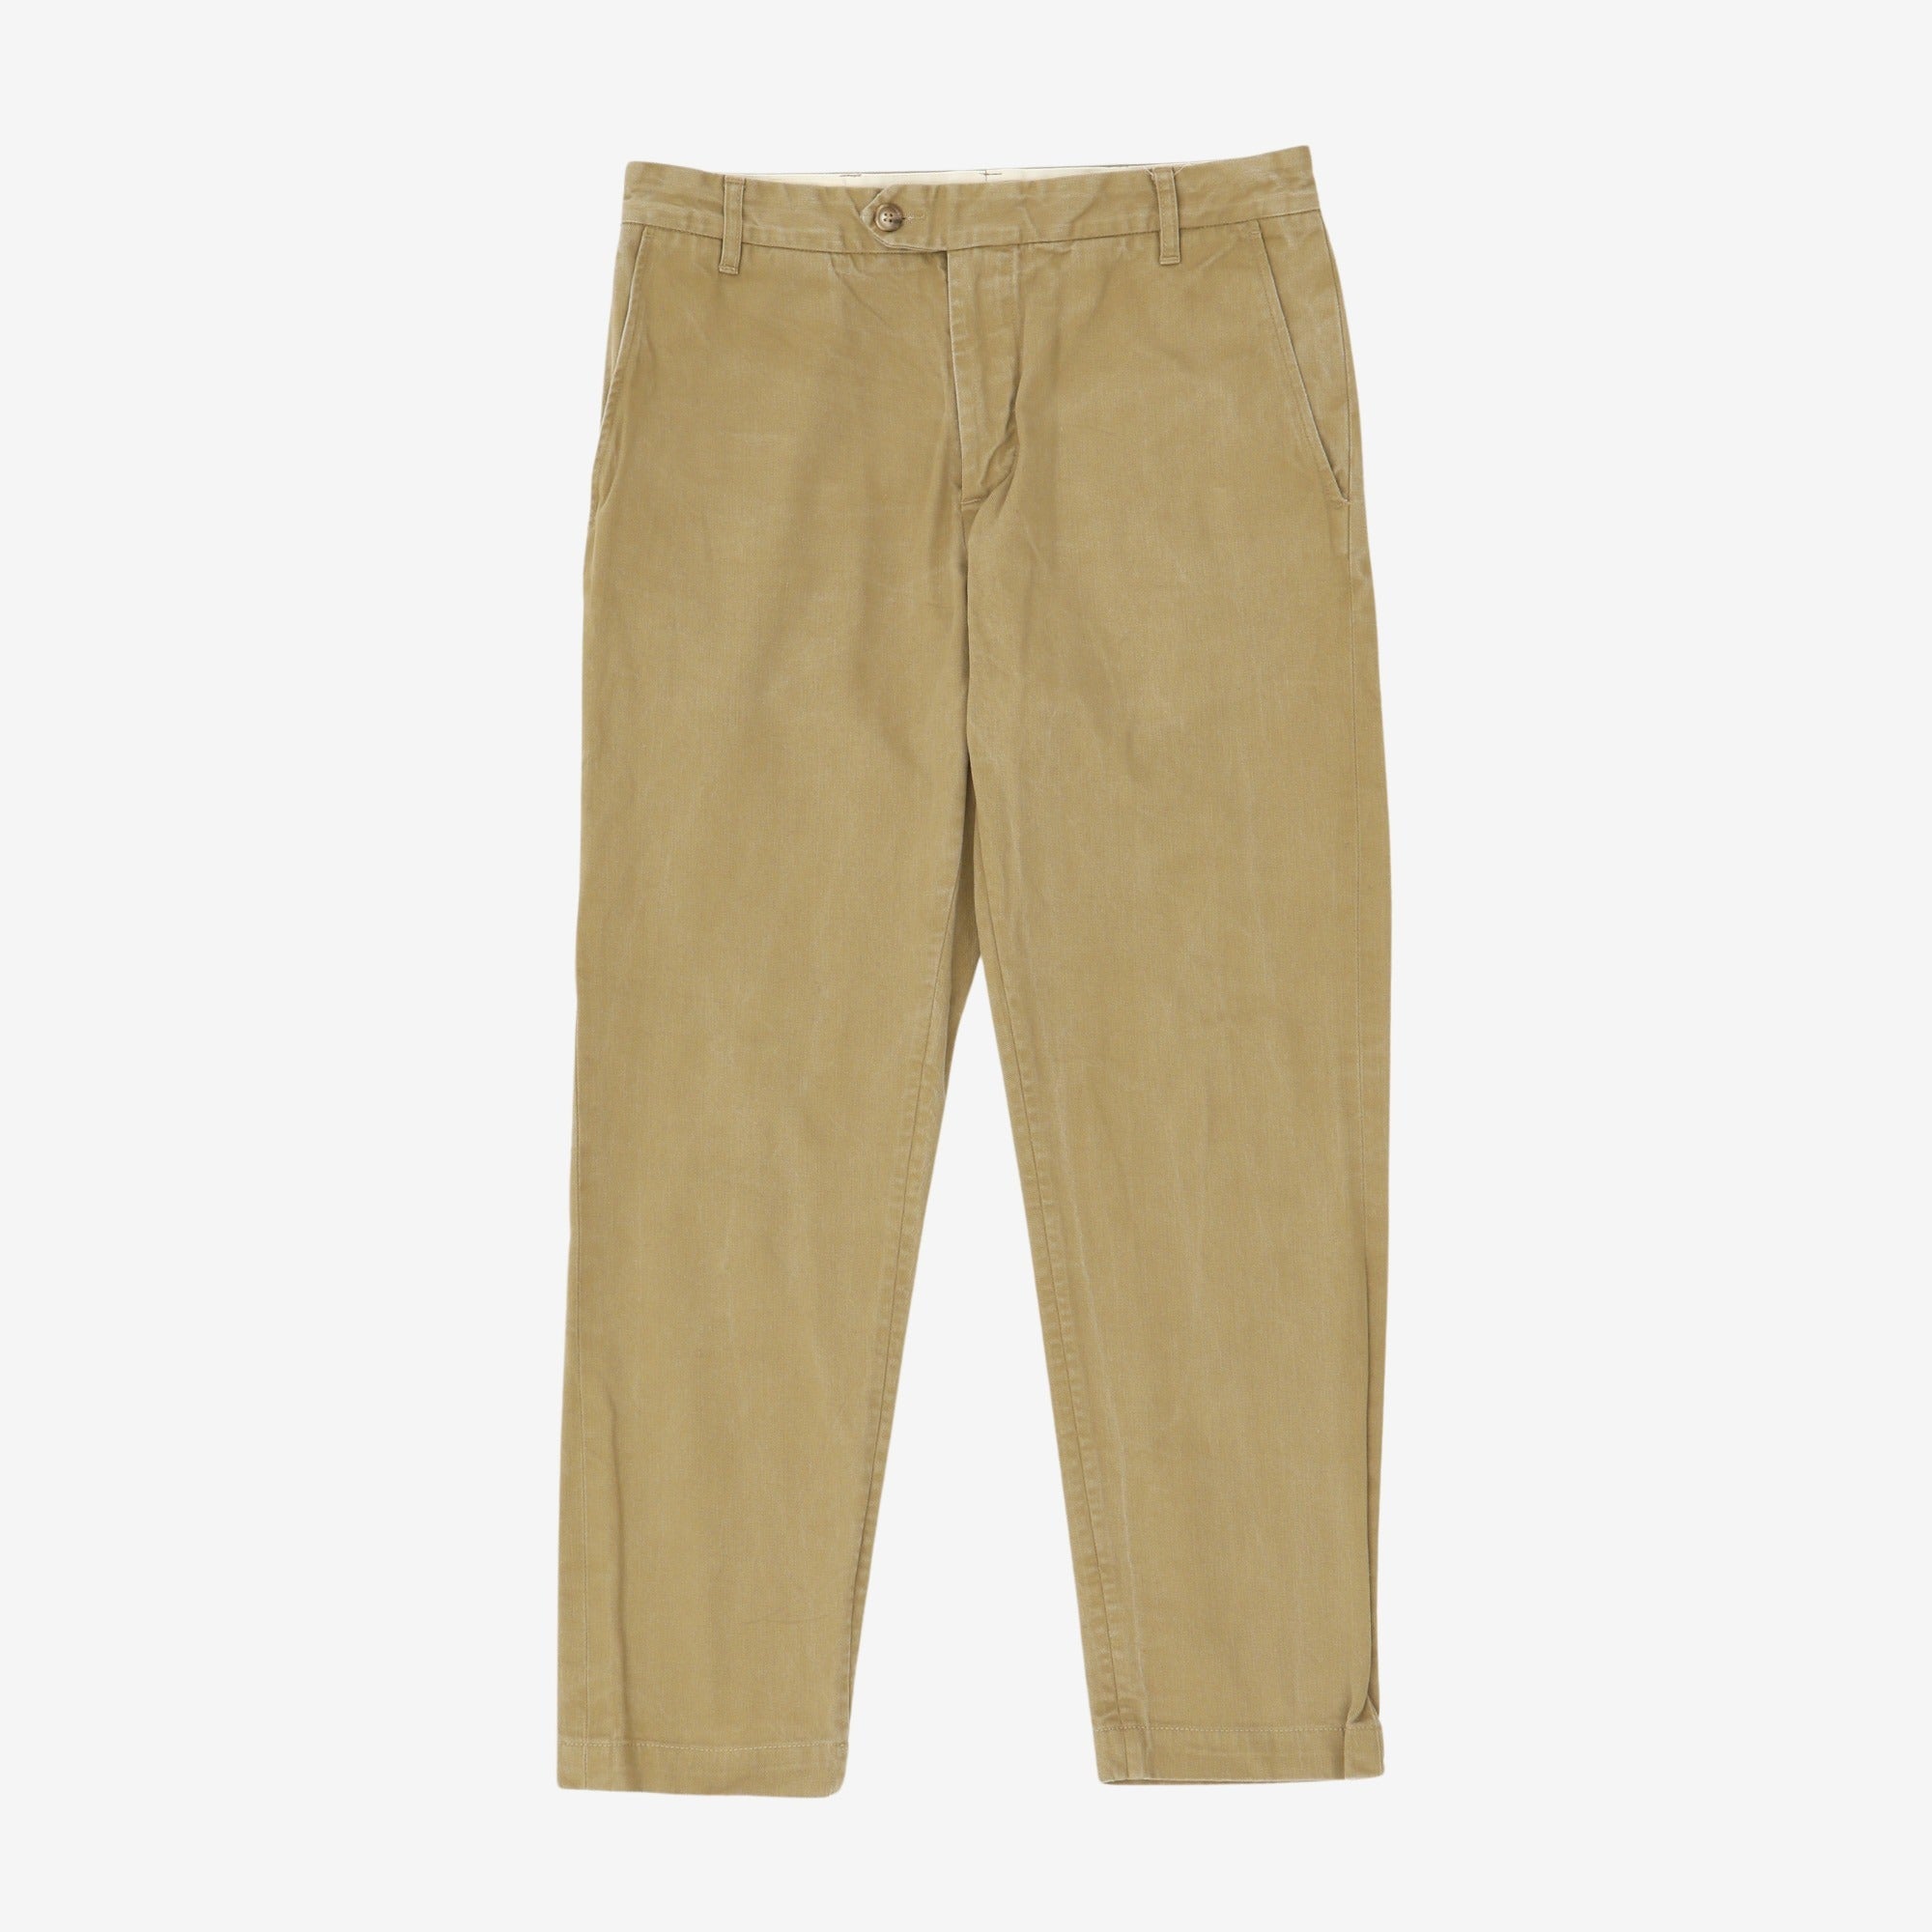 W11 Tapered Chinos (34W x 30L)